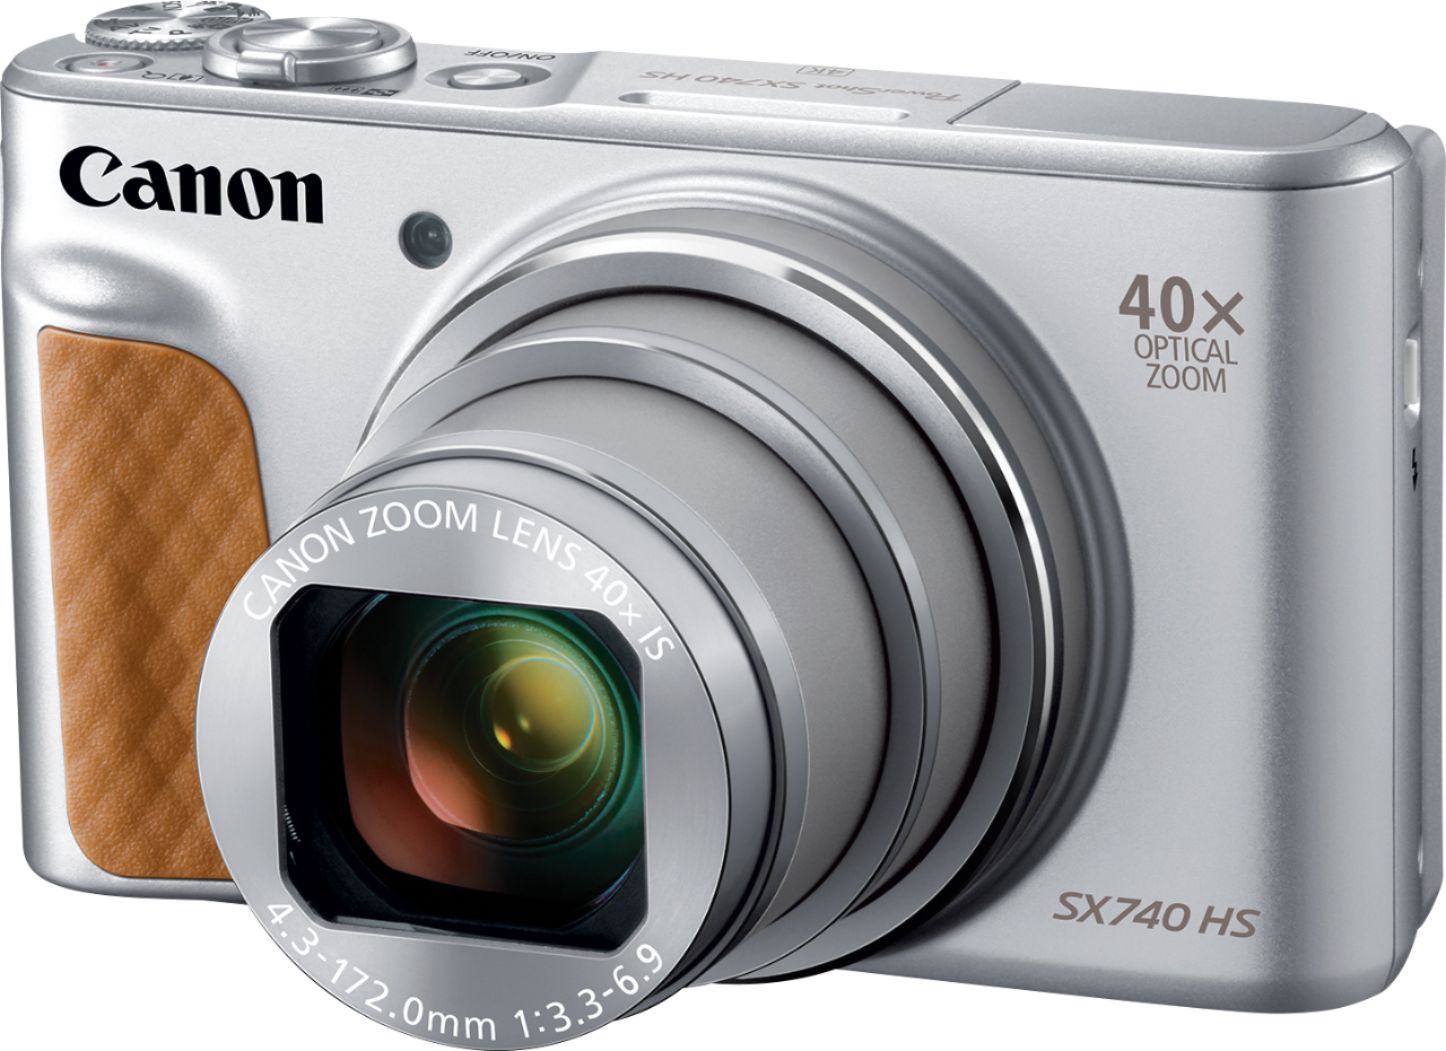 Left View: Canon PowerShot SX740 HS - Digital camera - compact - 20.3 MP - 4K / 30 fps - 40x optical zoom - Wi-Fi, Bluetooth - silver